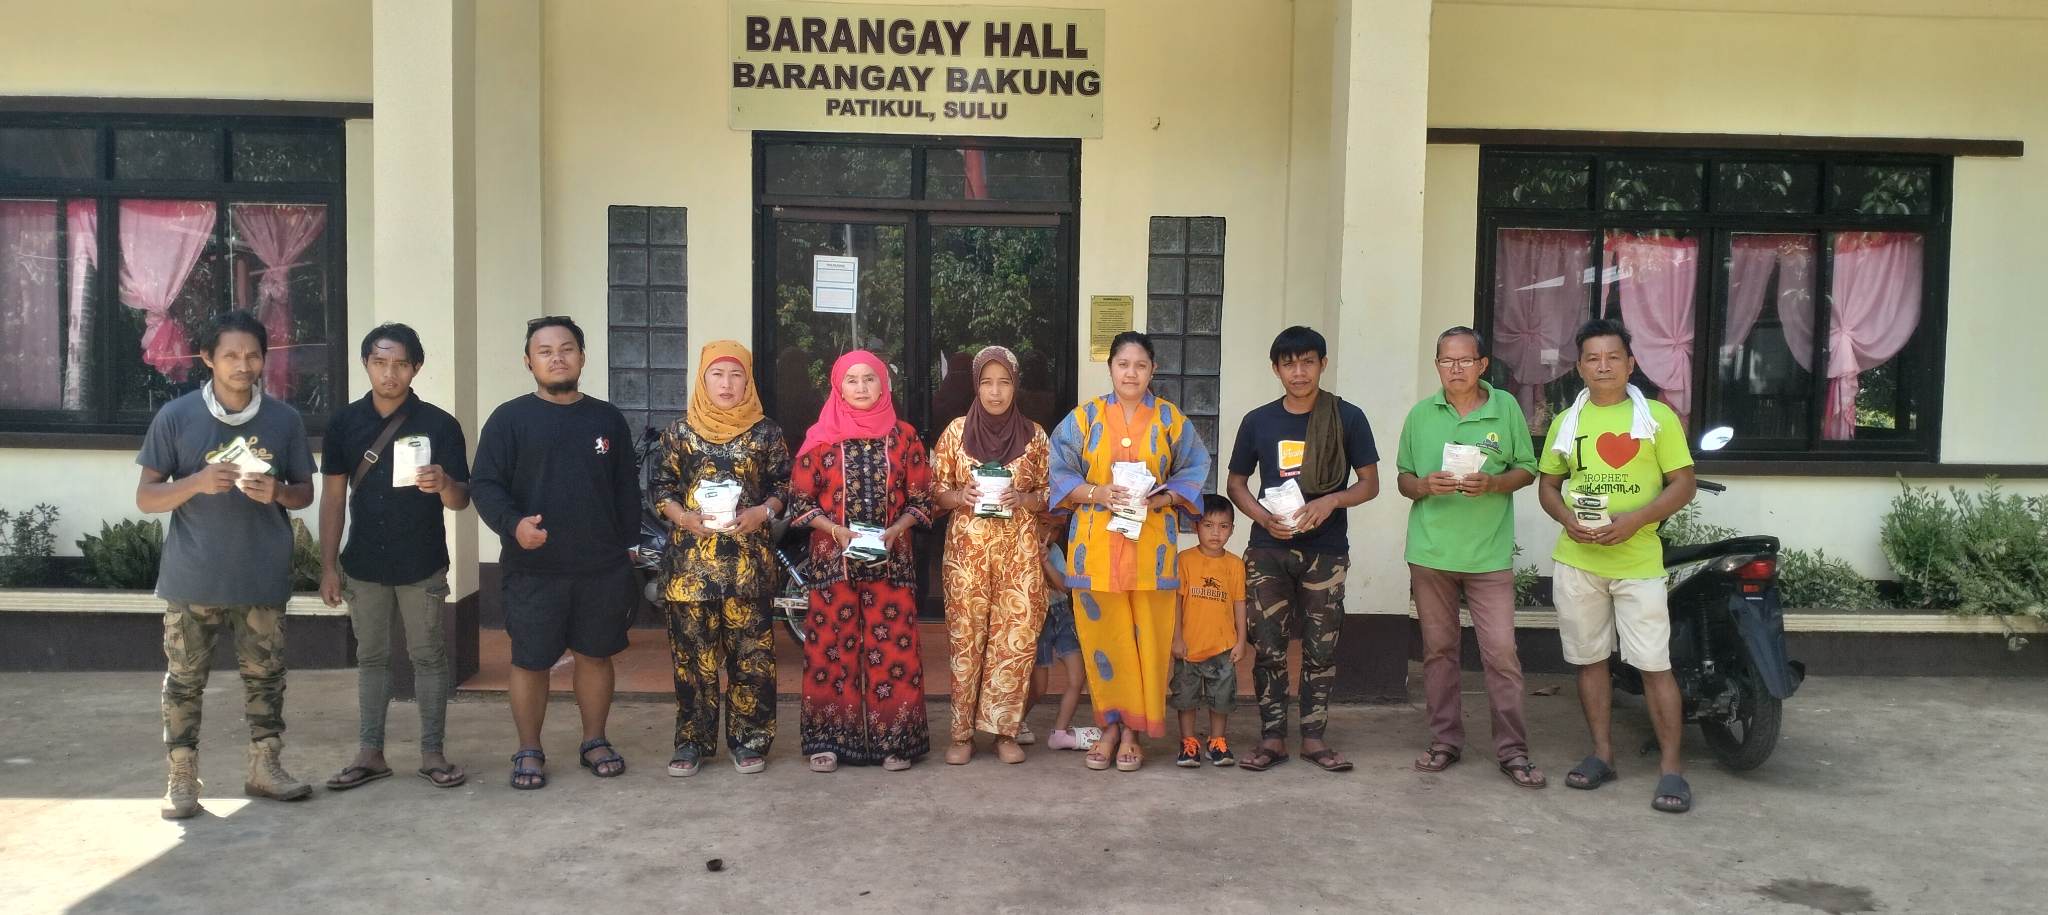 SAAD 9 delivered the last wave of livelihood assistance to 7 groups of farmers in Patikul